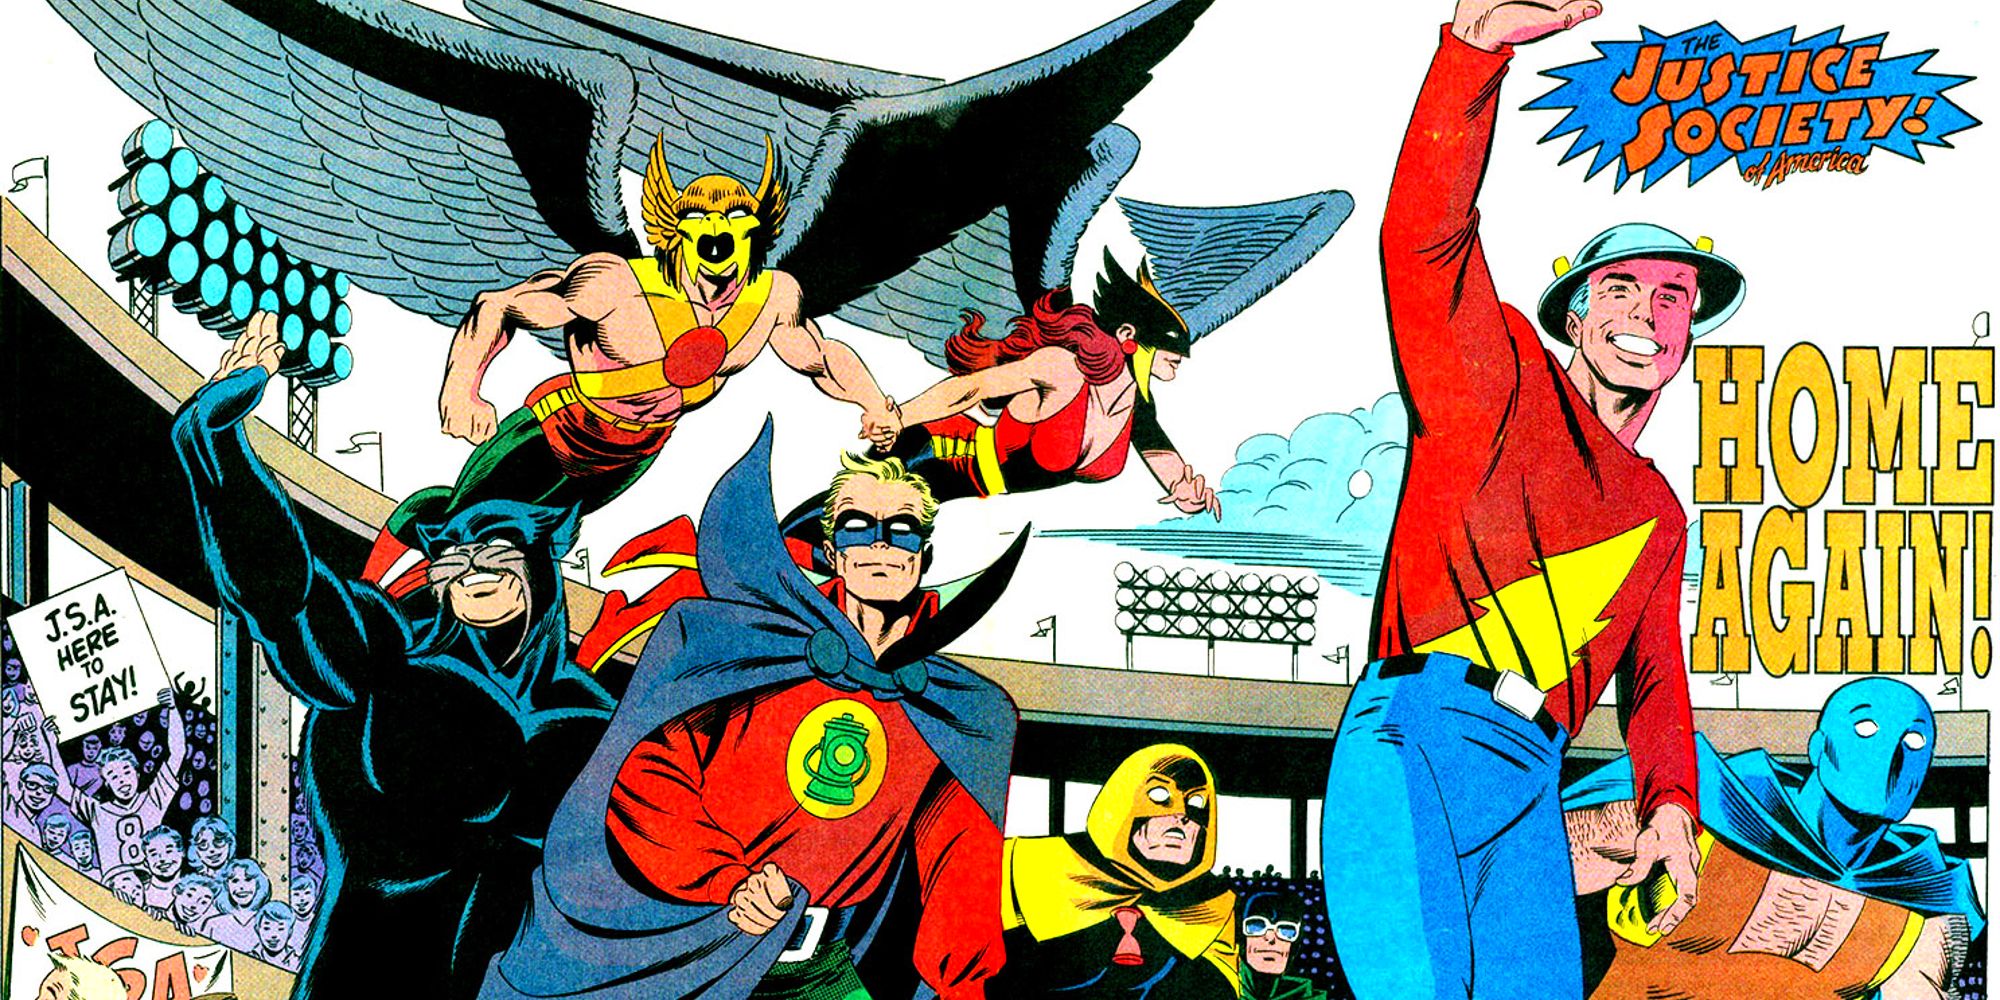 The world celebrating the return of the JSA in Justice Society Of America #1 (1990)